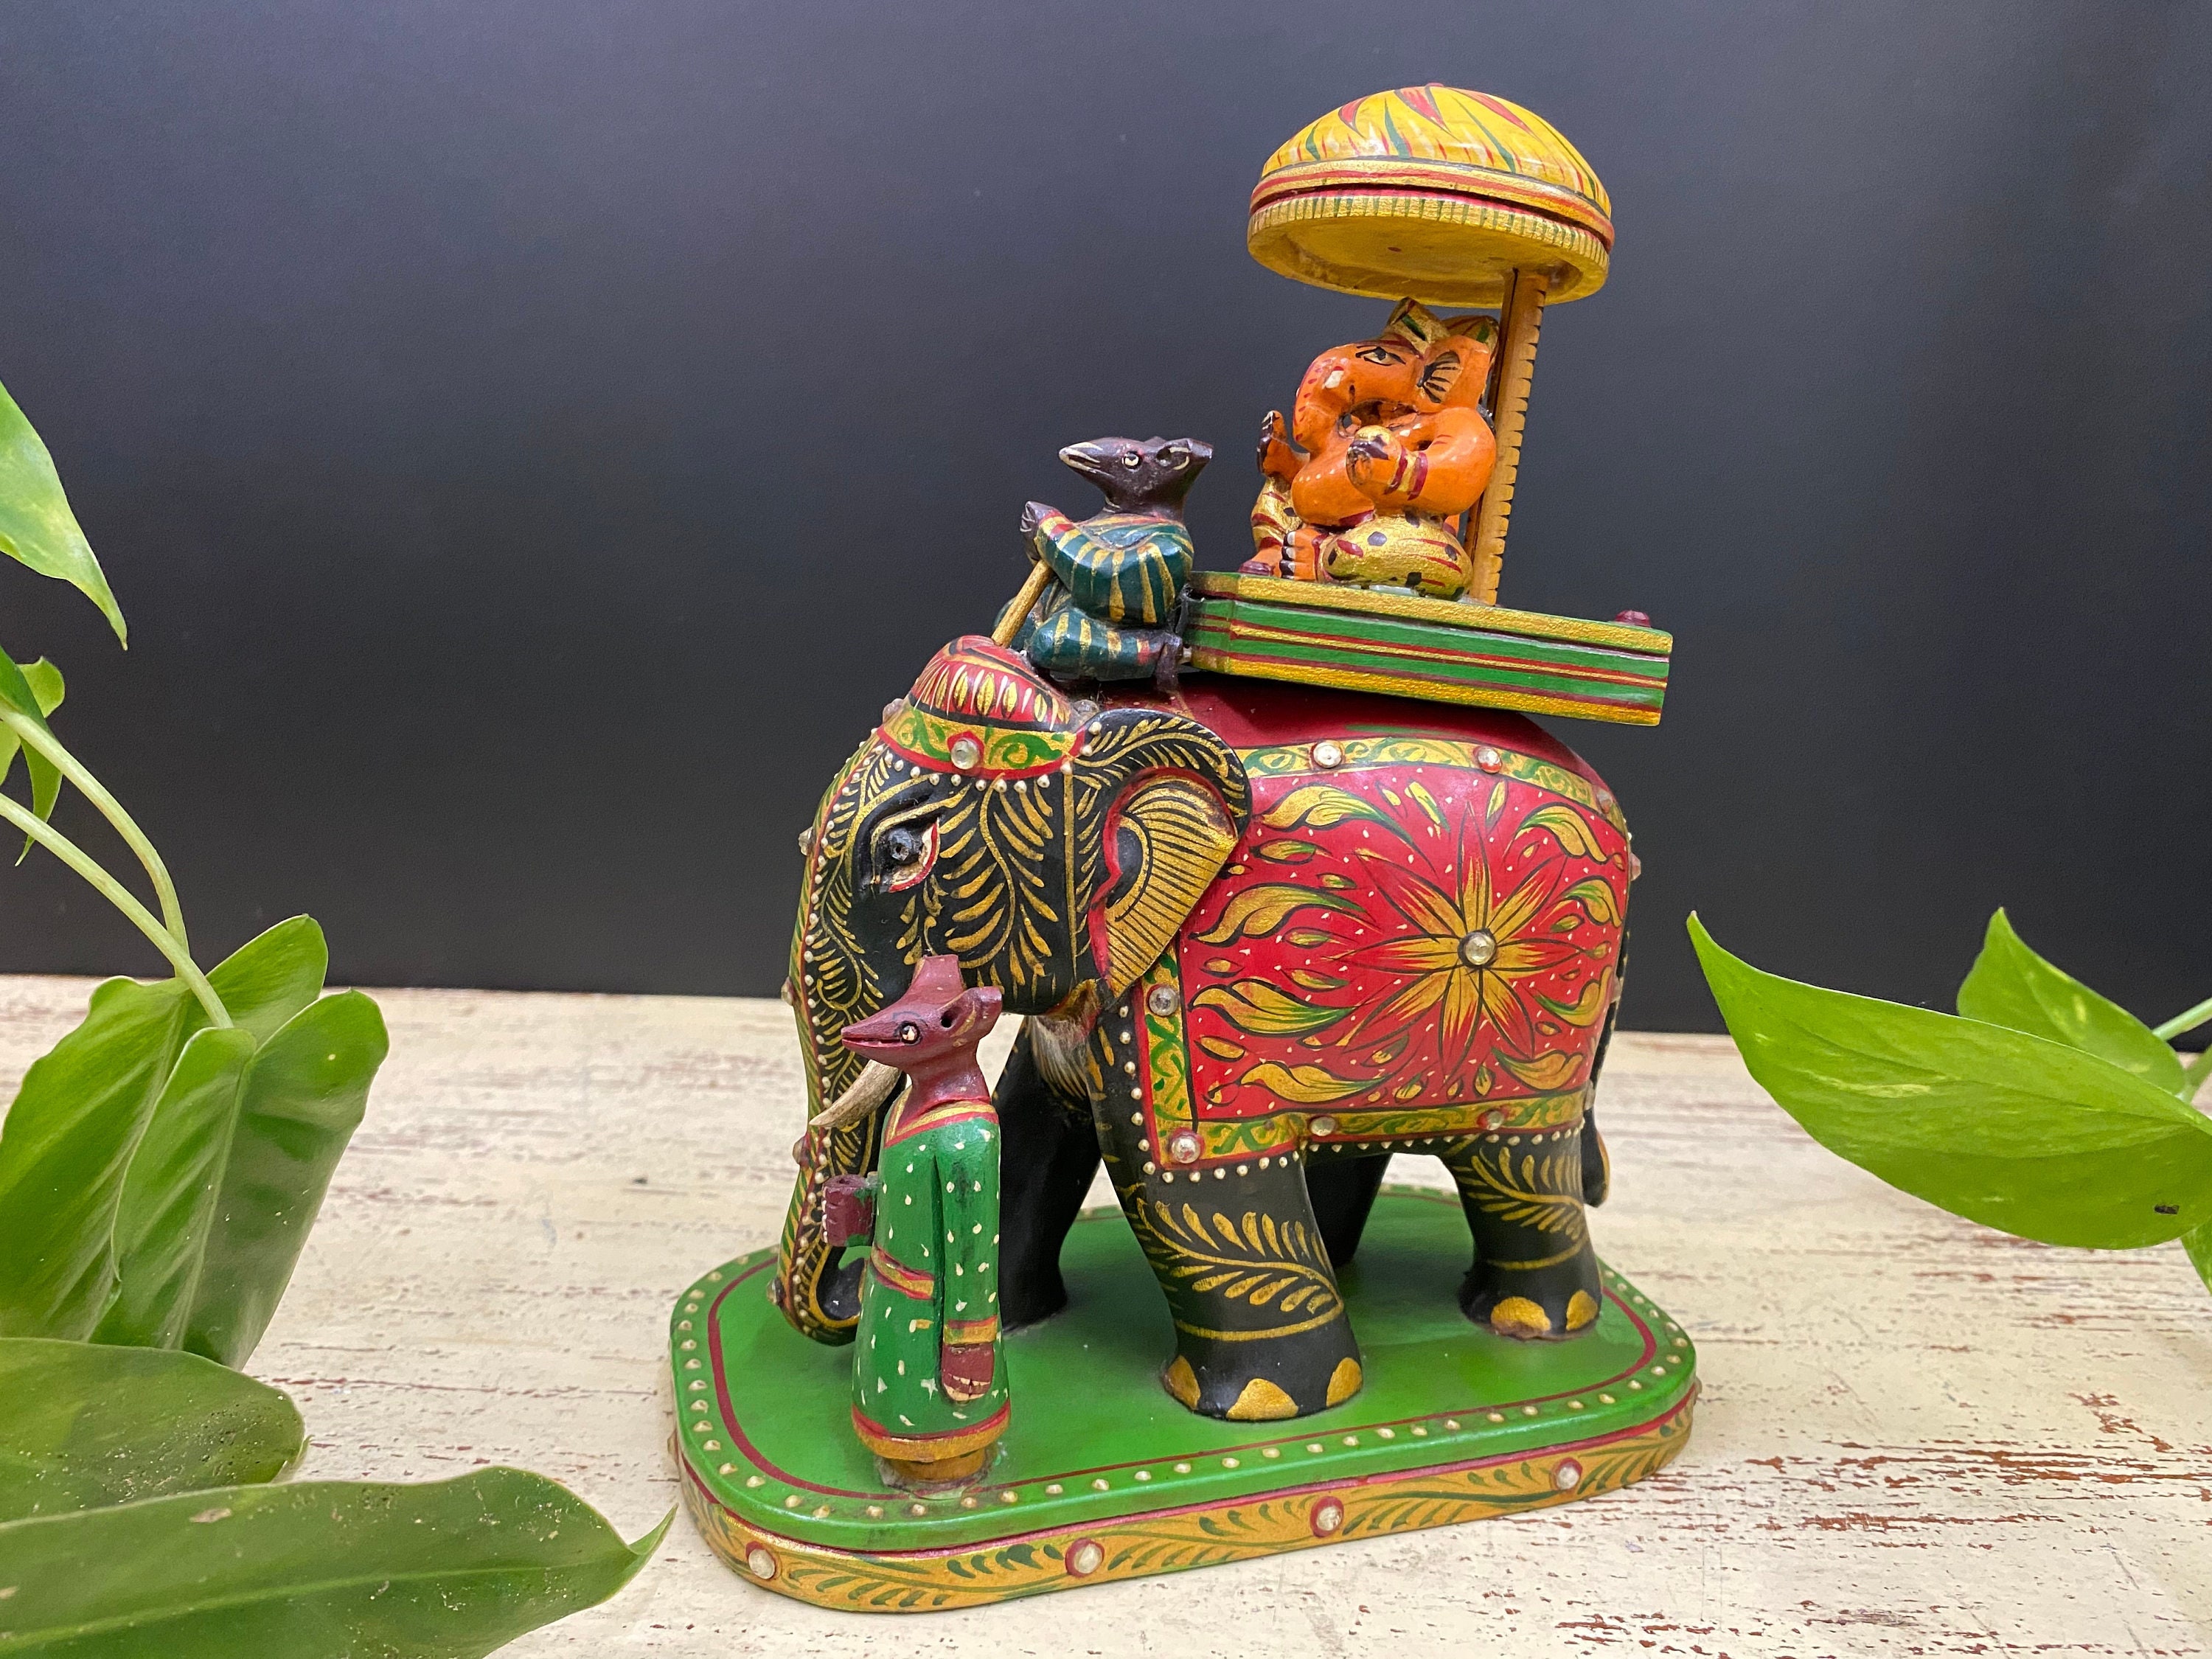 Wooden elephant statue Hand carving handicrafts artifacts home decor collectibles gifts Indian art